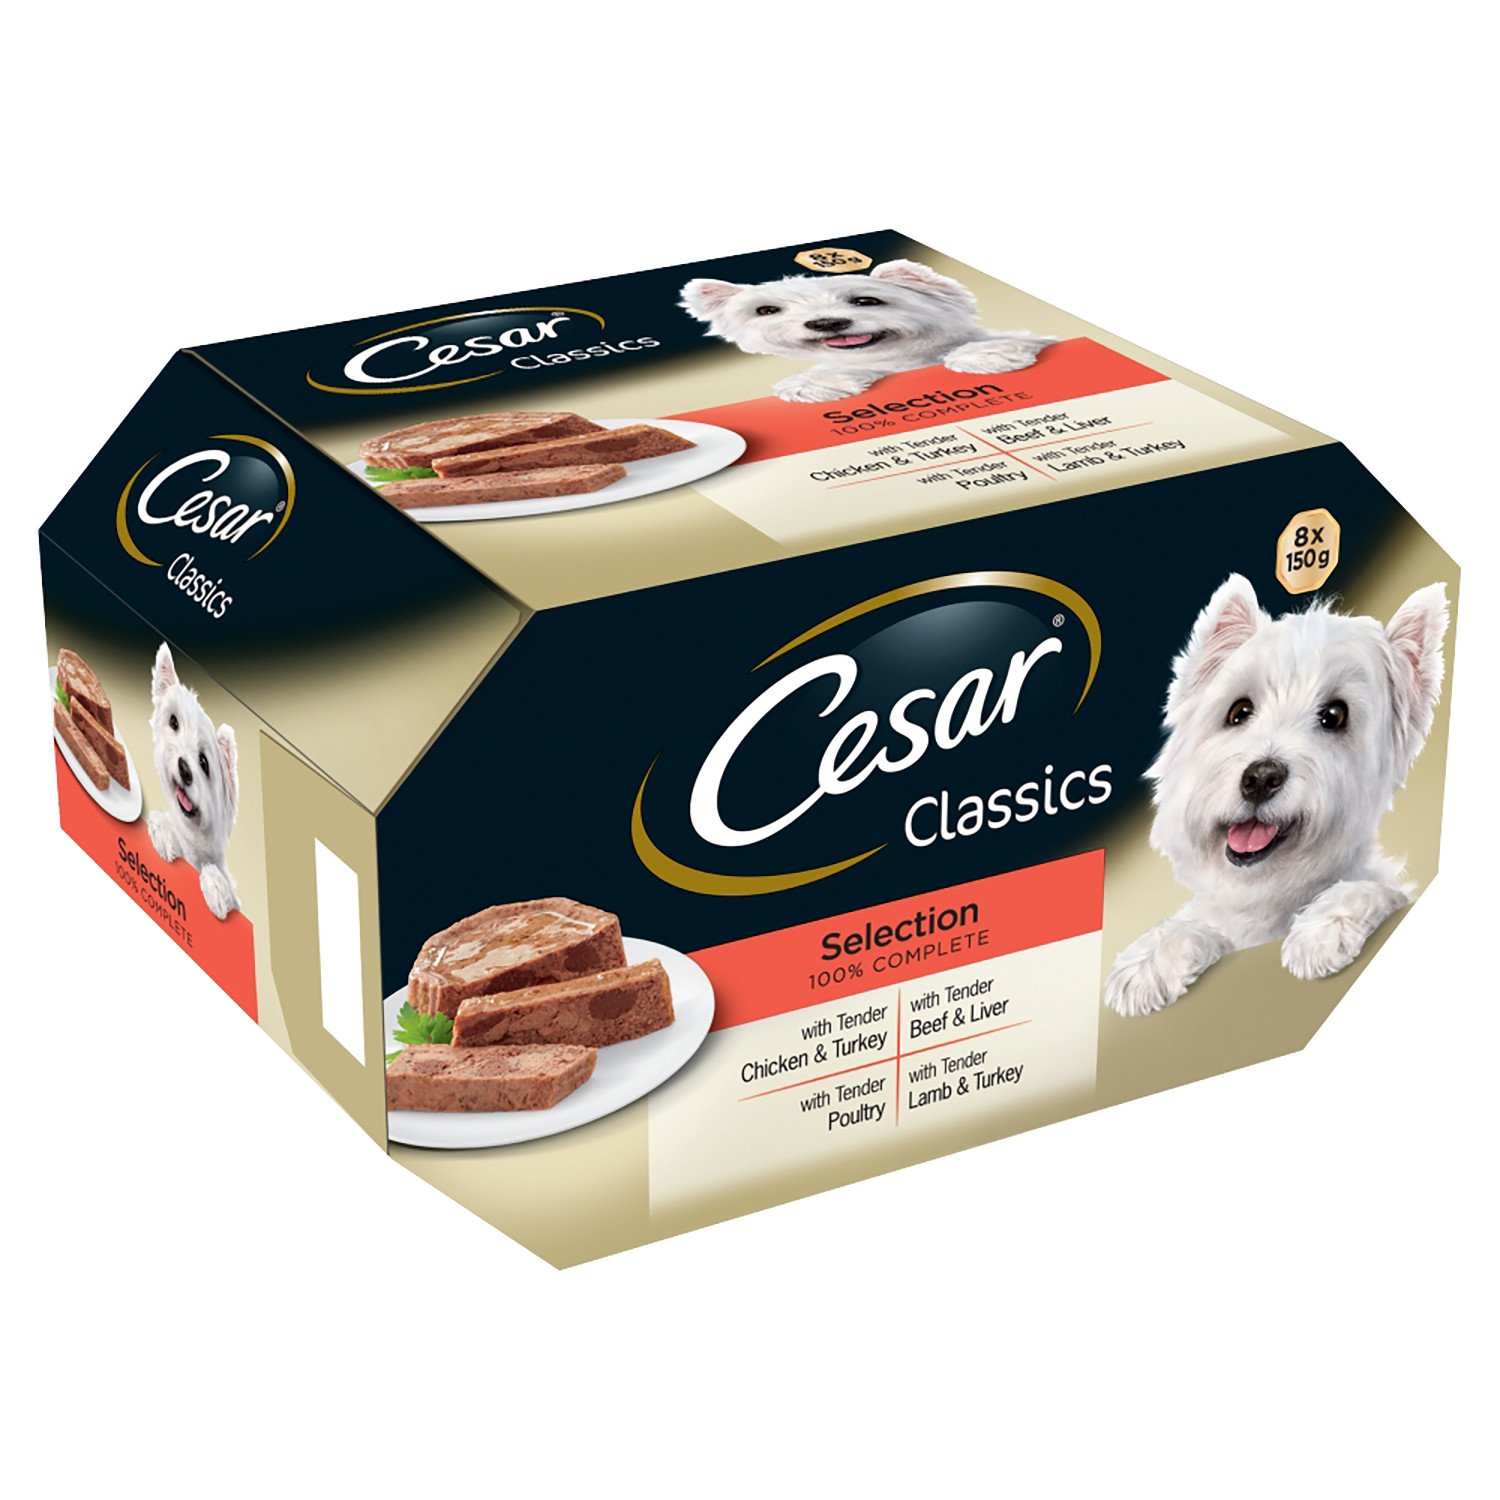 Cesar Classics Loaf Jelly Selection Dog Food 8 Pack Image